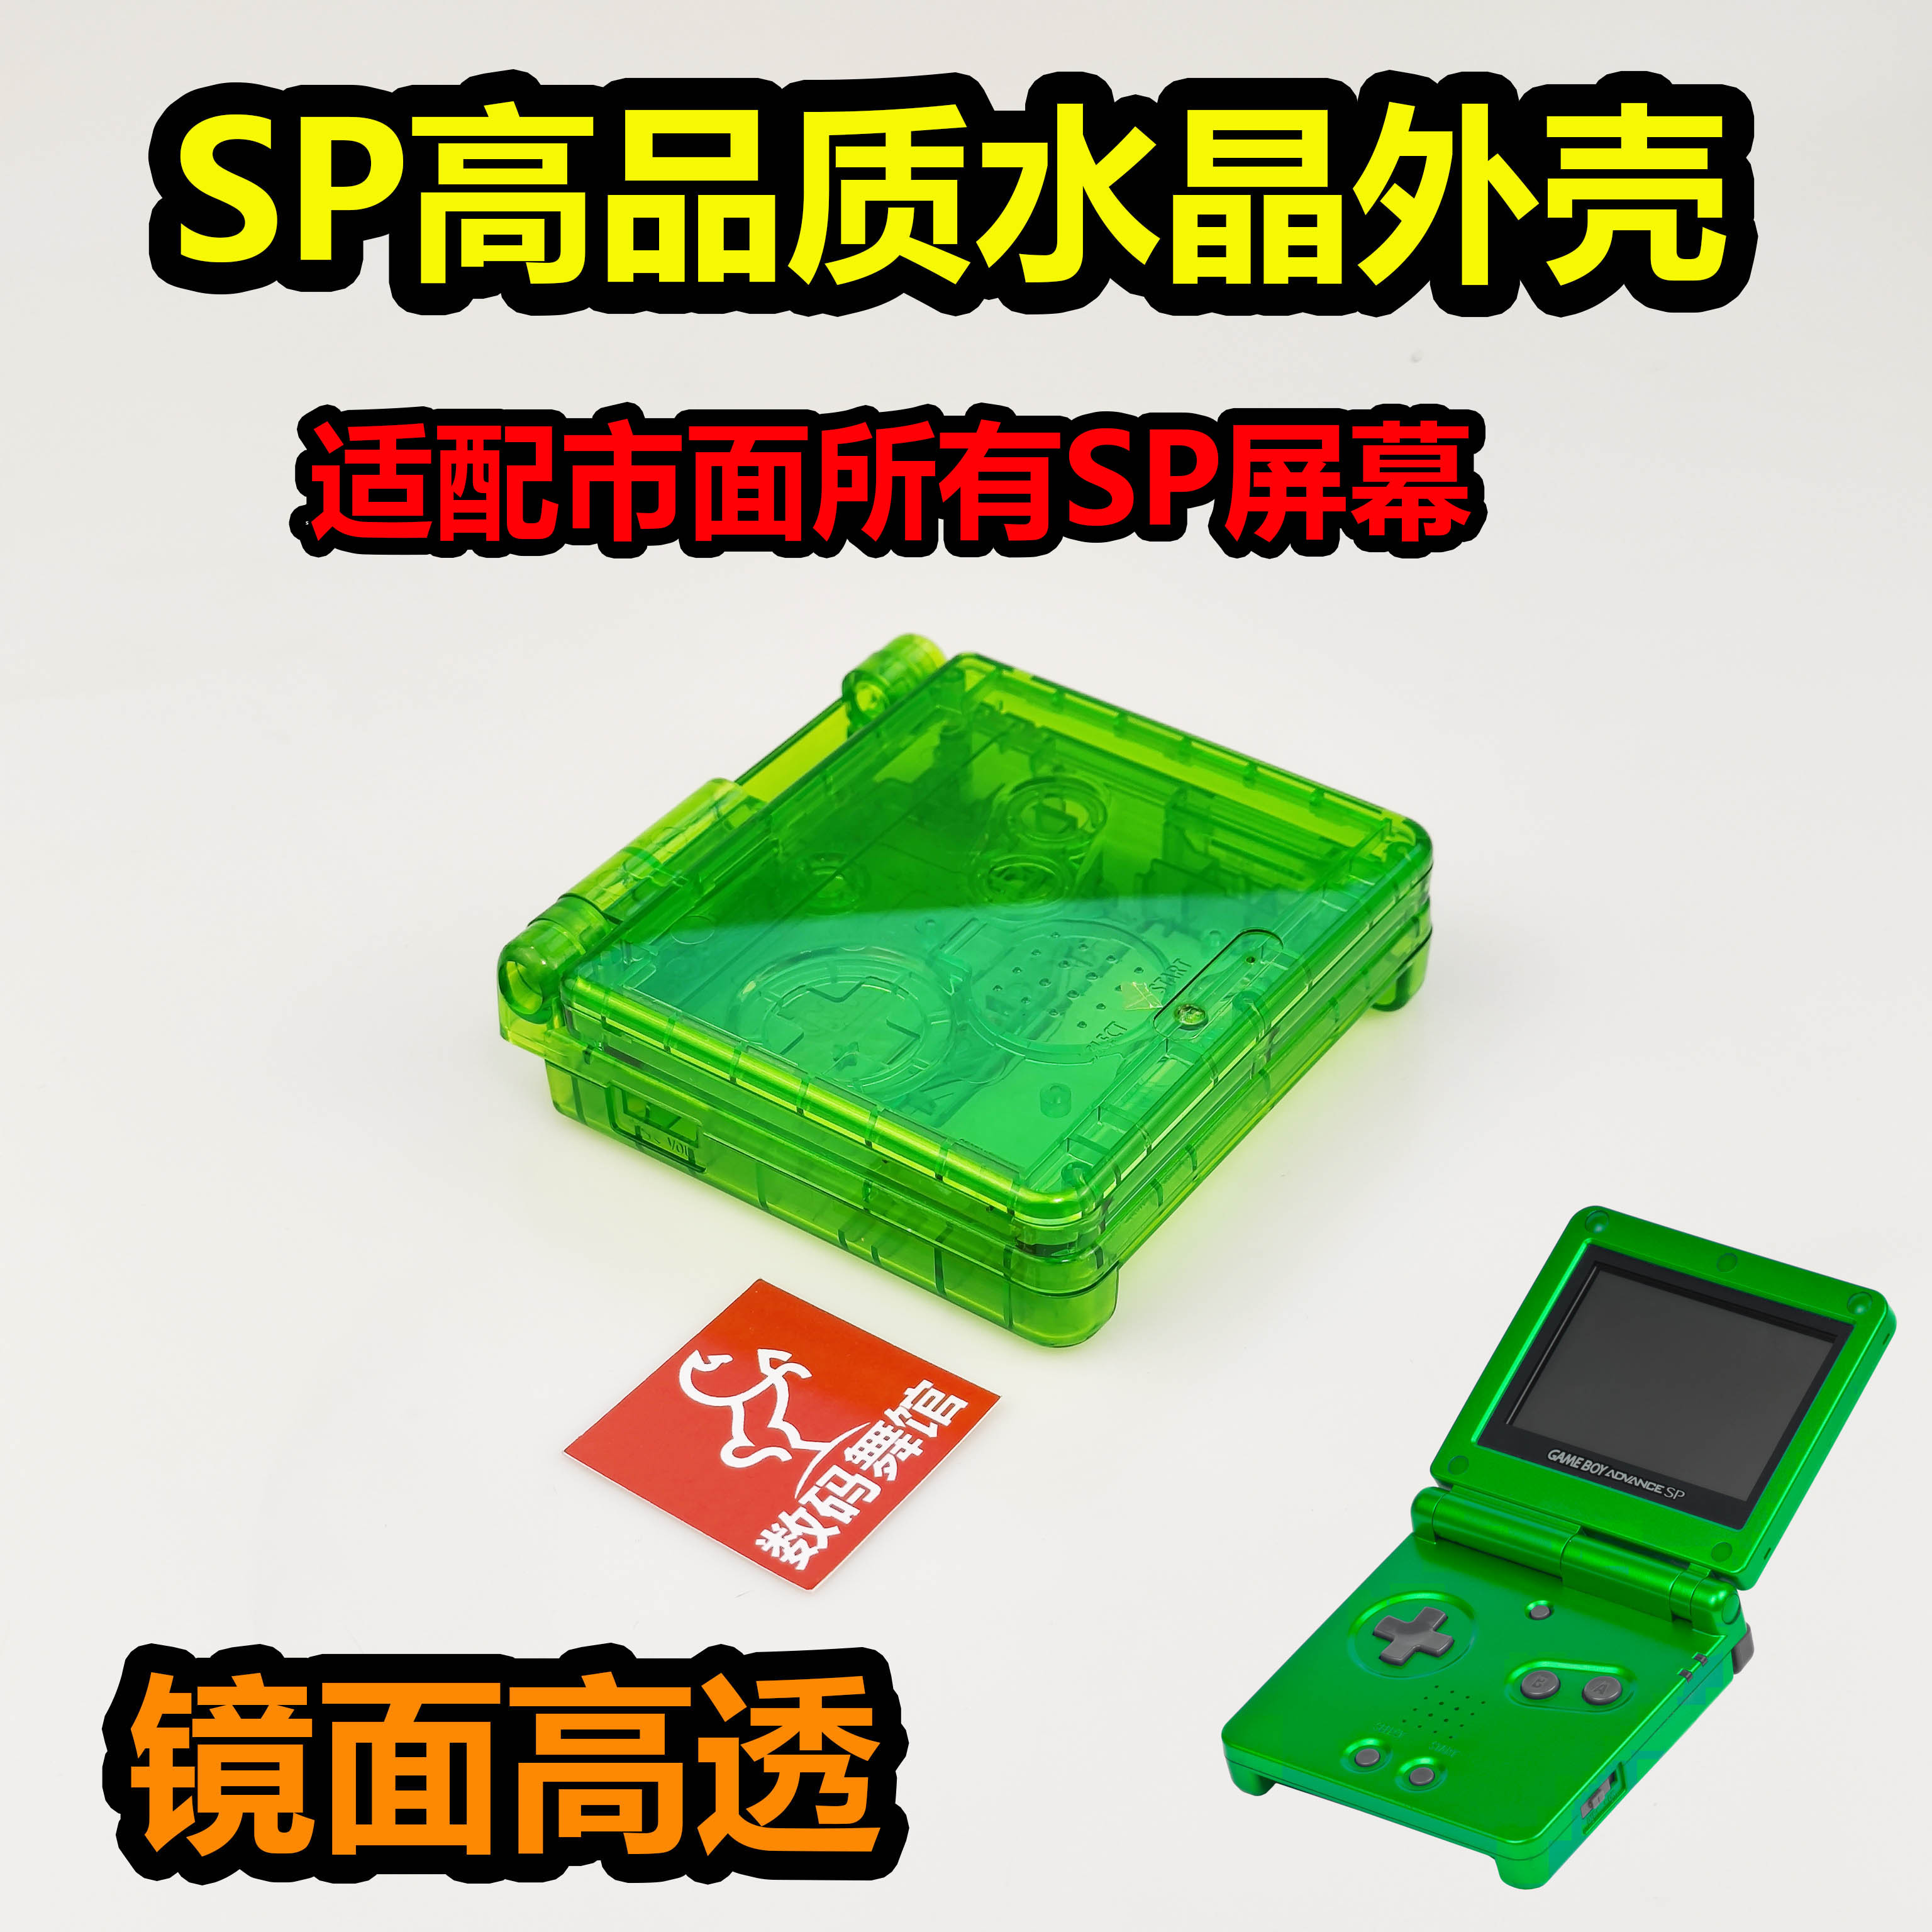 SP shell High quality guide shell changed color Nintendo gameboy digital dance floor-Taobao